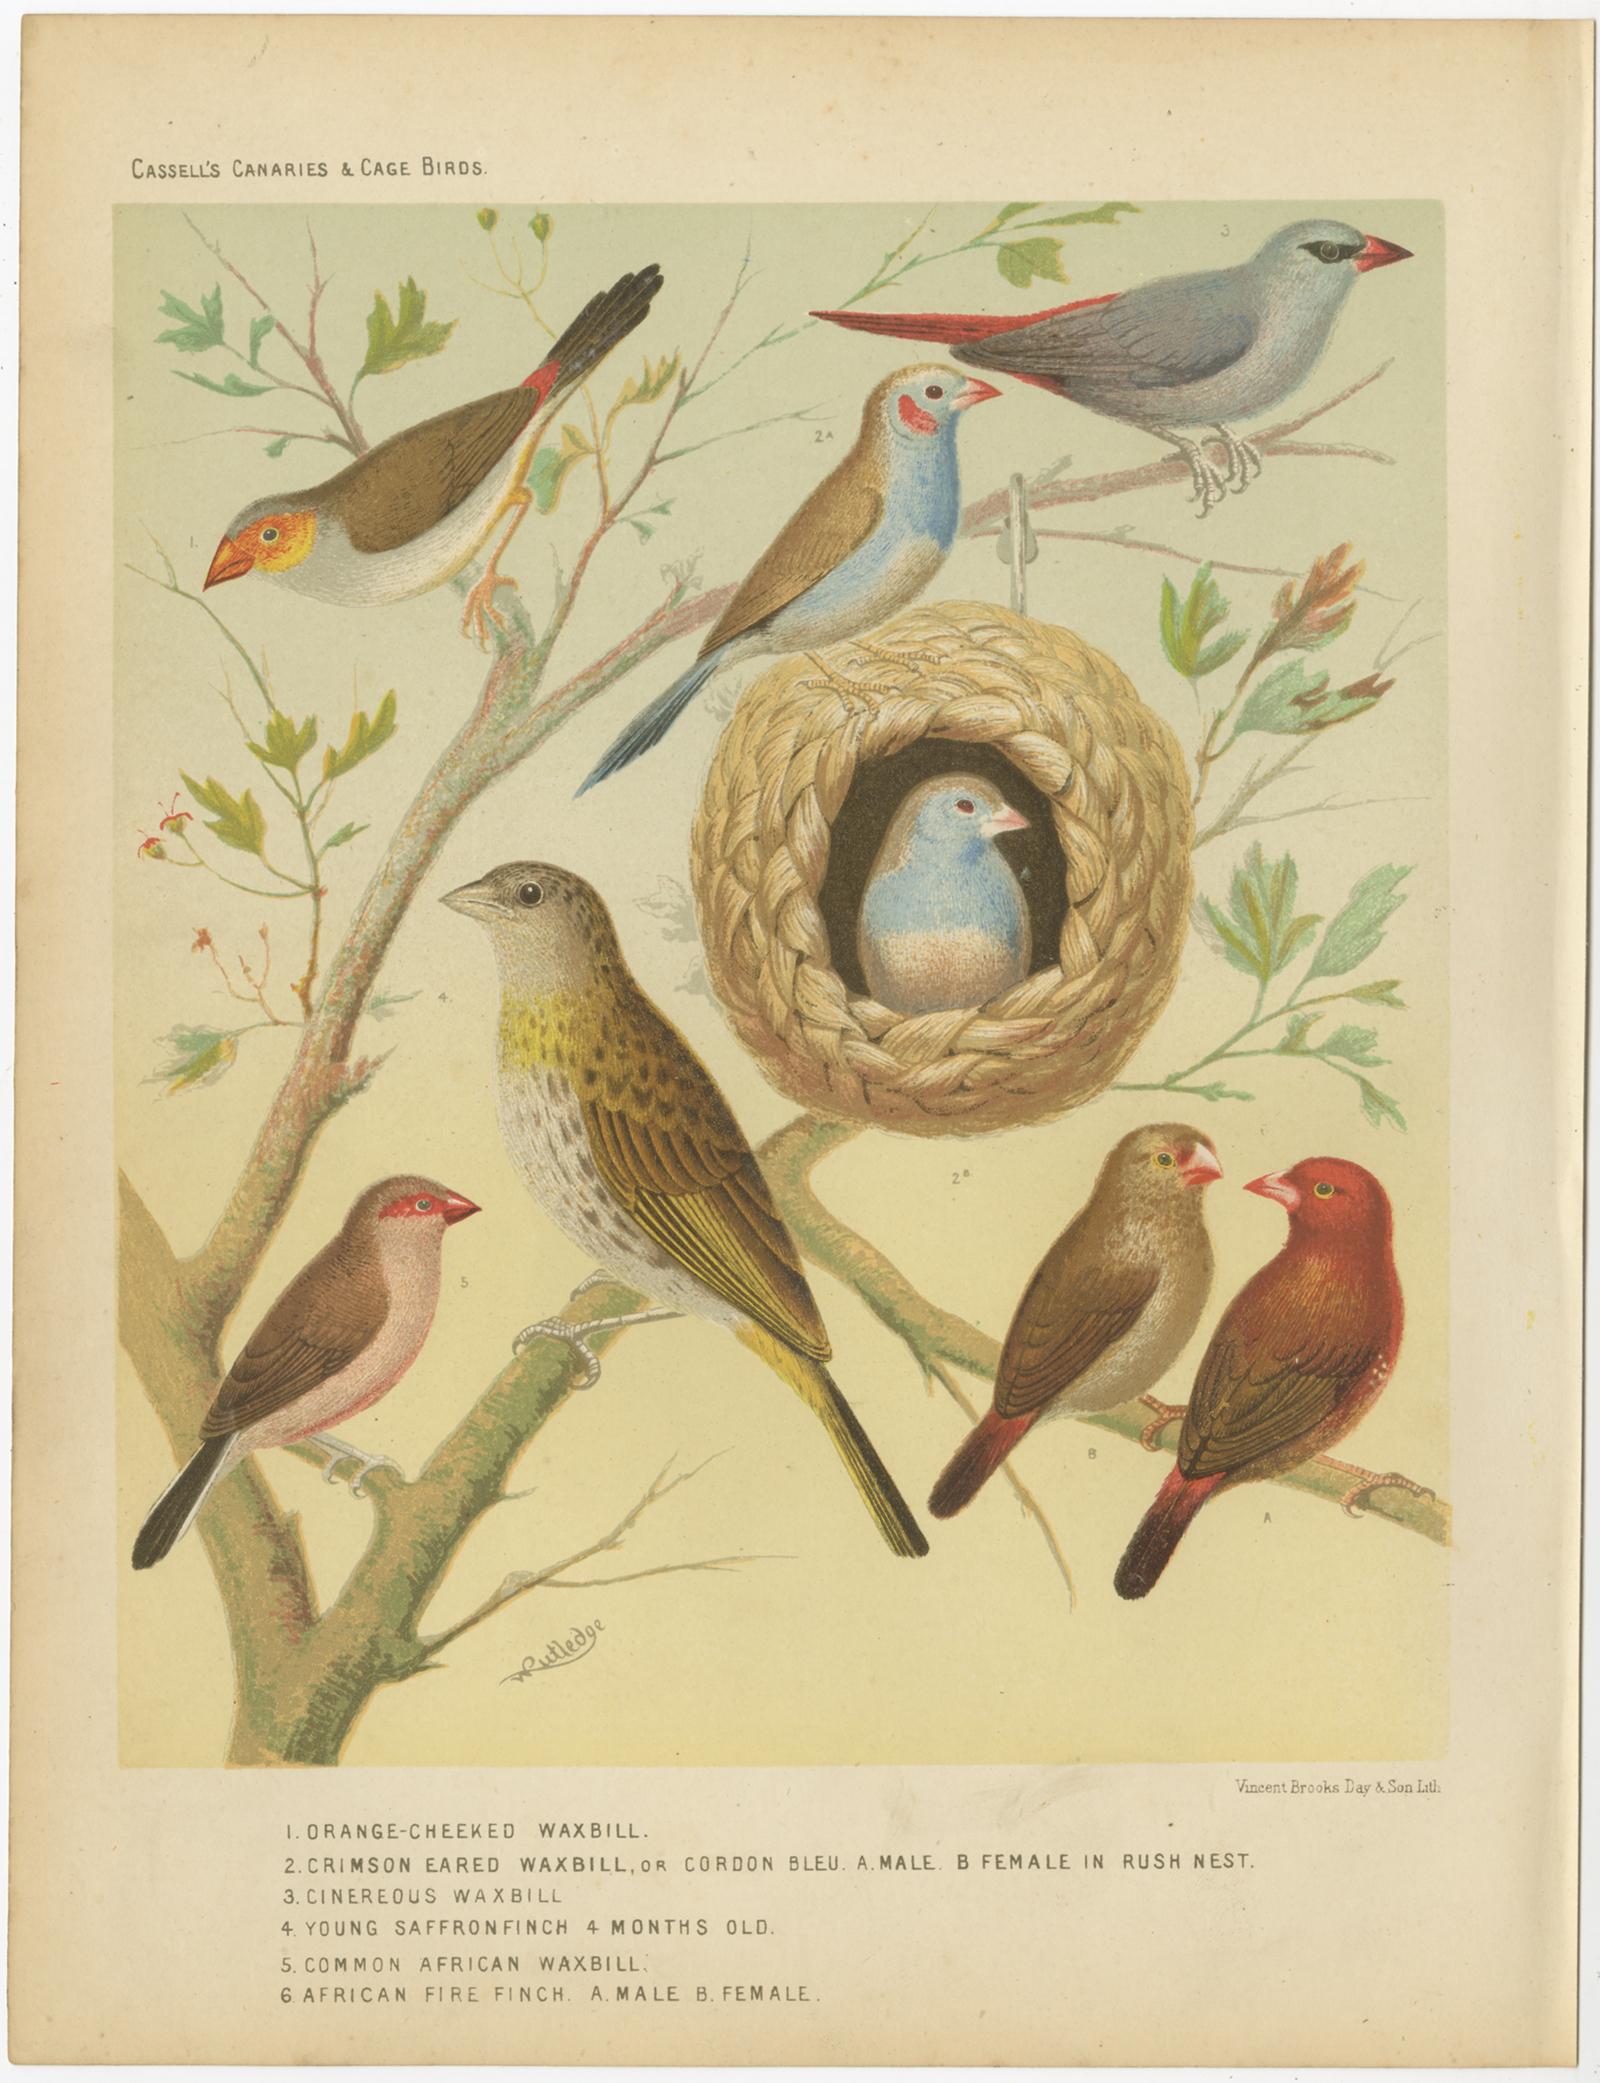 Antique bird print titled '1. Orange-cheeked Waxbill 2. Crimson Eared Waxbill, or Cordon Blue 3. Cinereous Waxbill 4. Young Saffronfinch 4 months old 5. Common African Waxbill 6. African Fire Finch A.Male B. Female' Old bird print depicting the